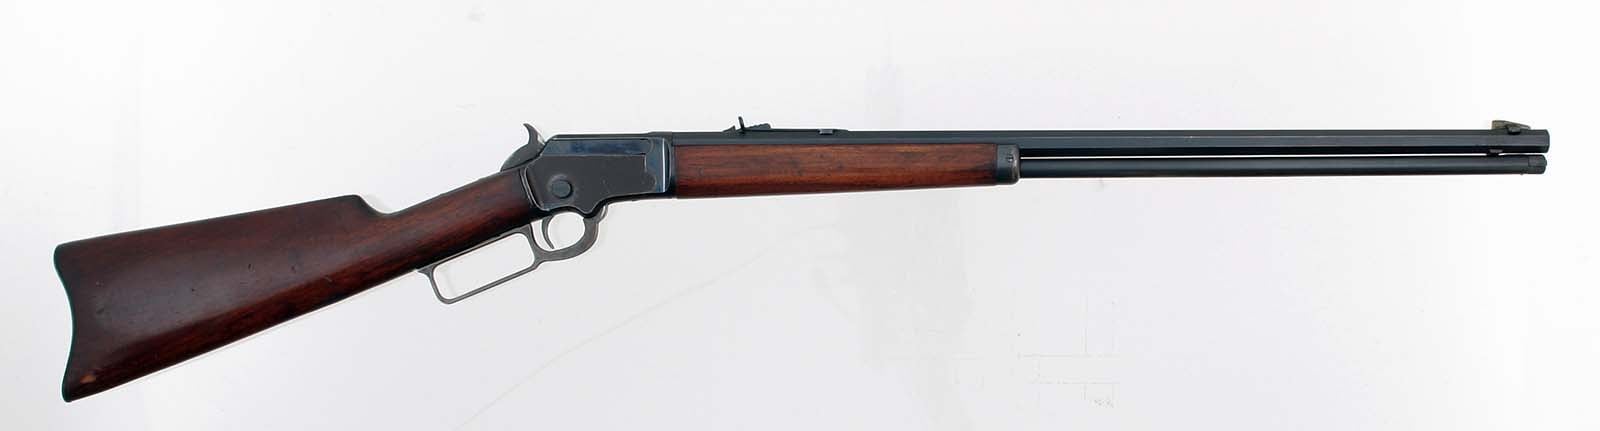 marlin 1895 serial number date of manufacture